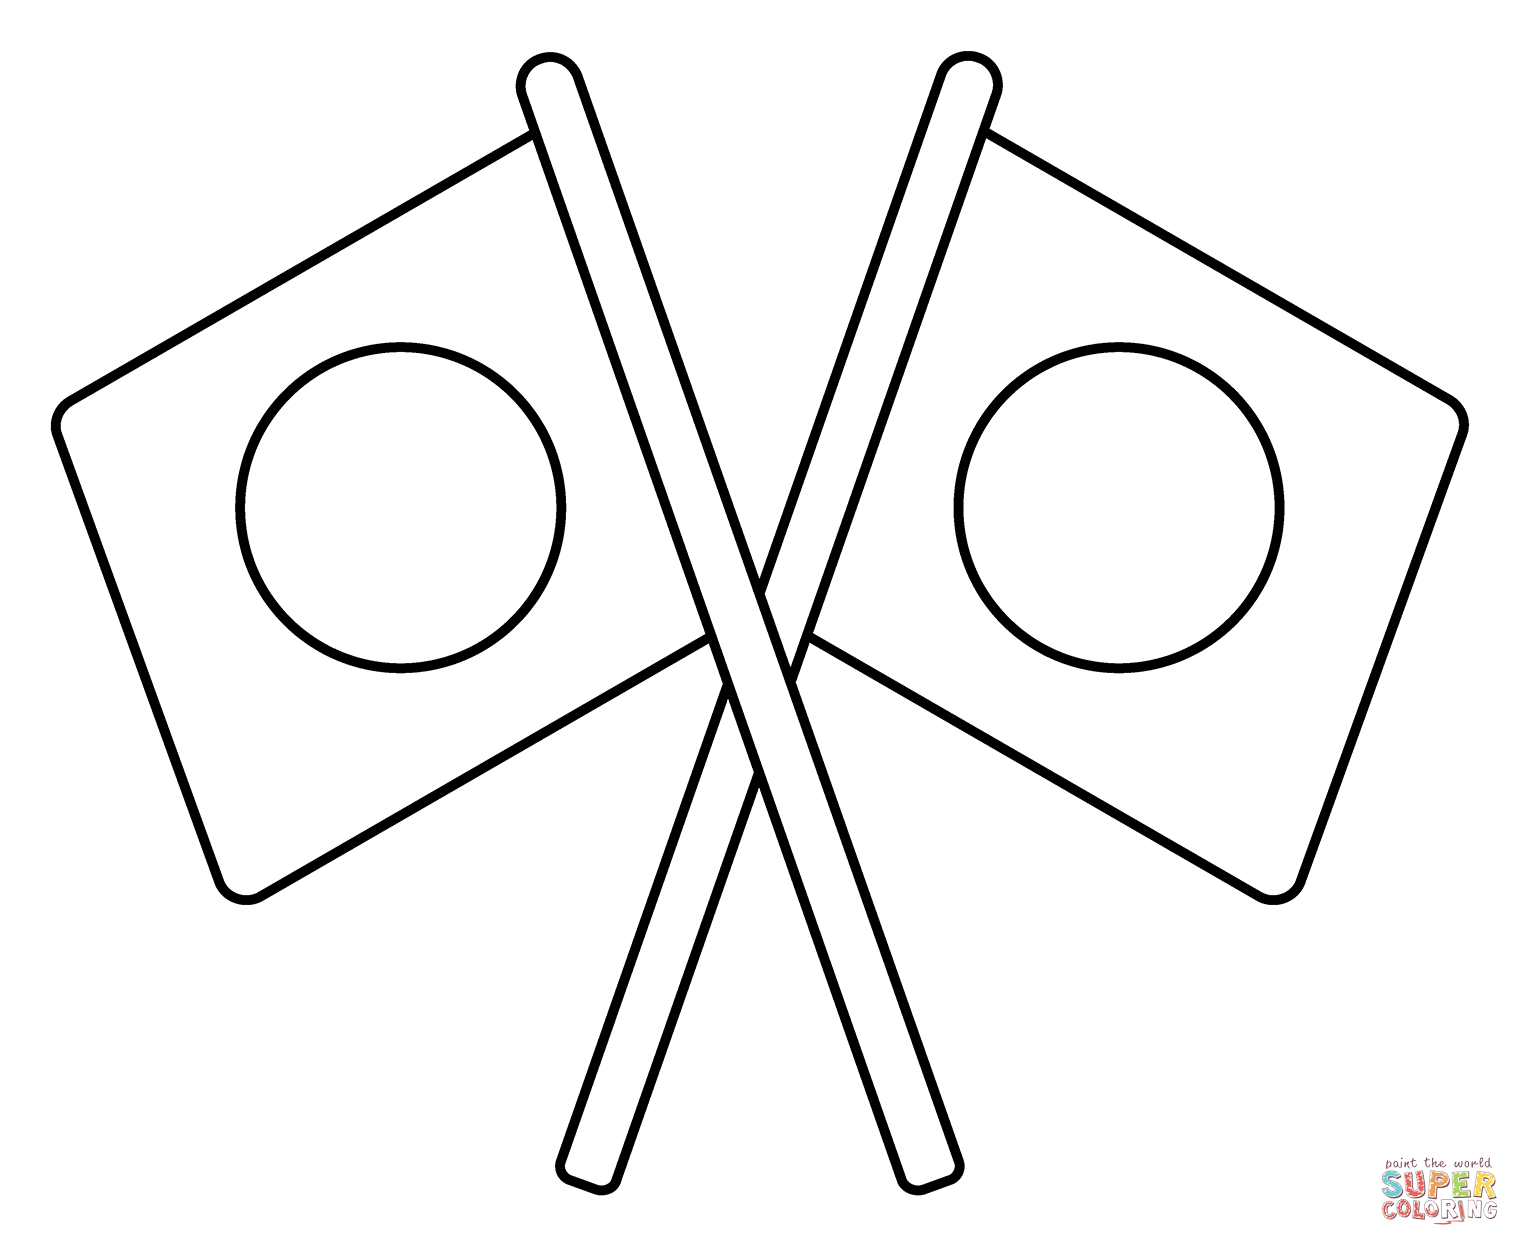 Crossed flags emoji coloring page free printable coloring pages